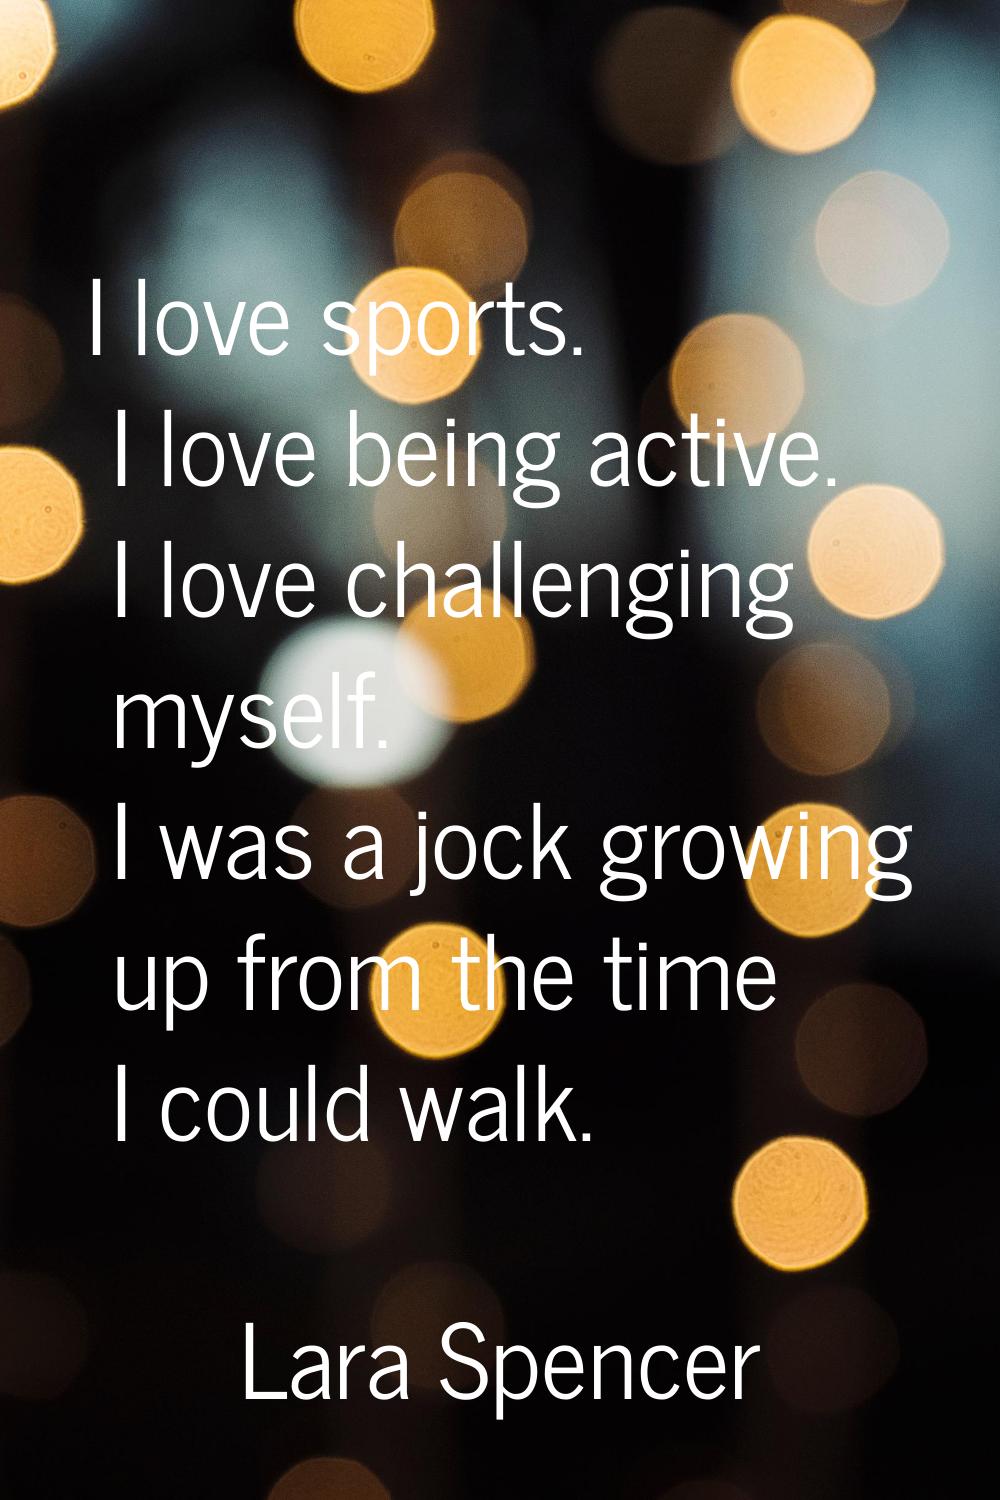 I love sports. I love being active. I love challenging myself. I was a jock growing up from the tim